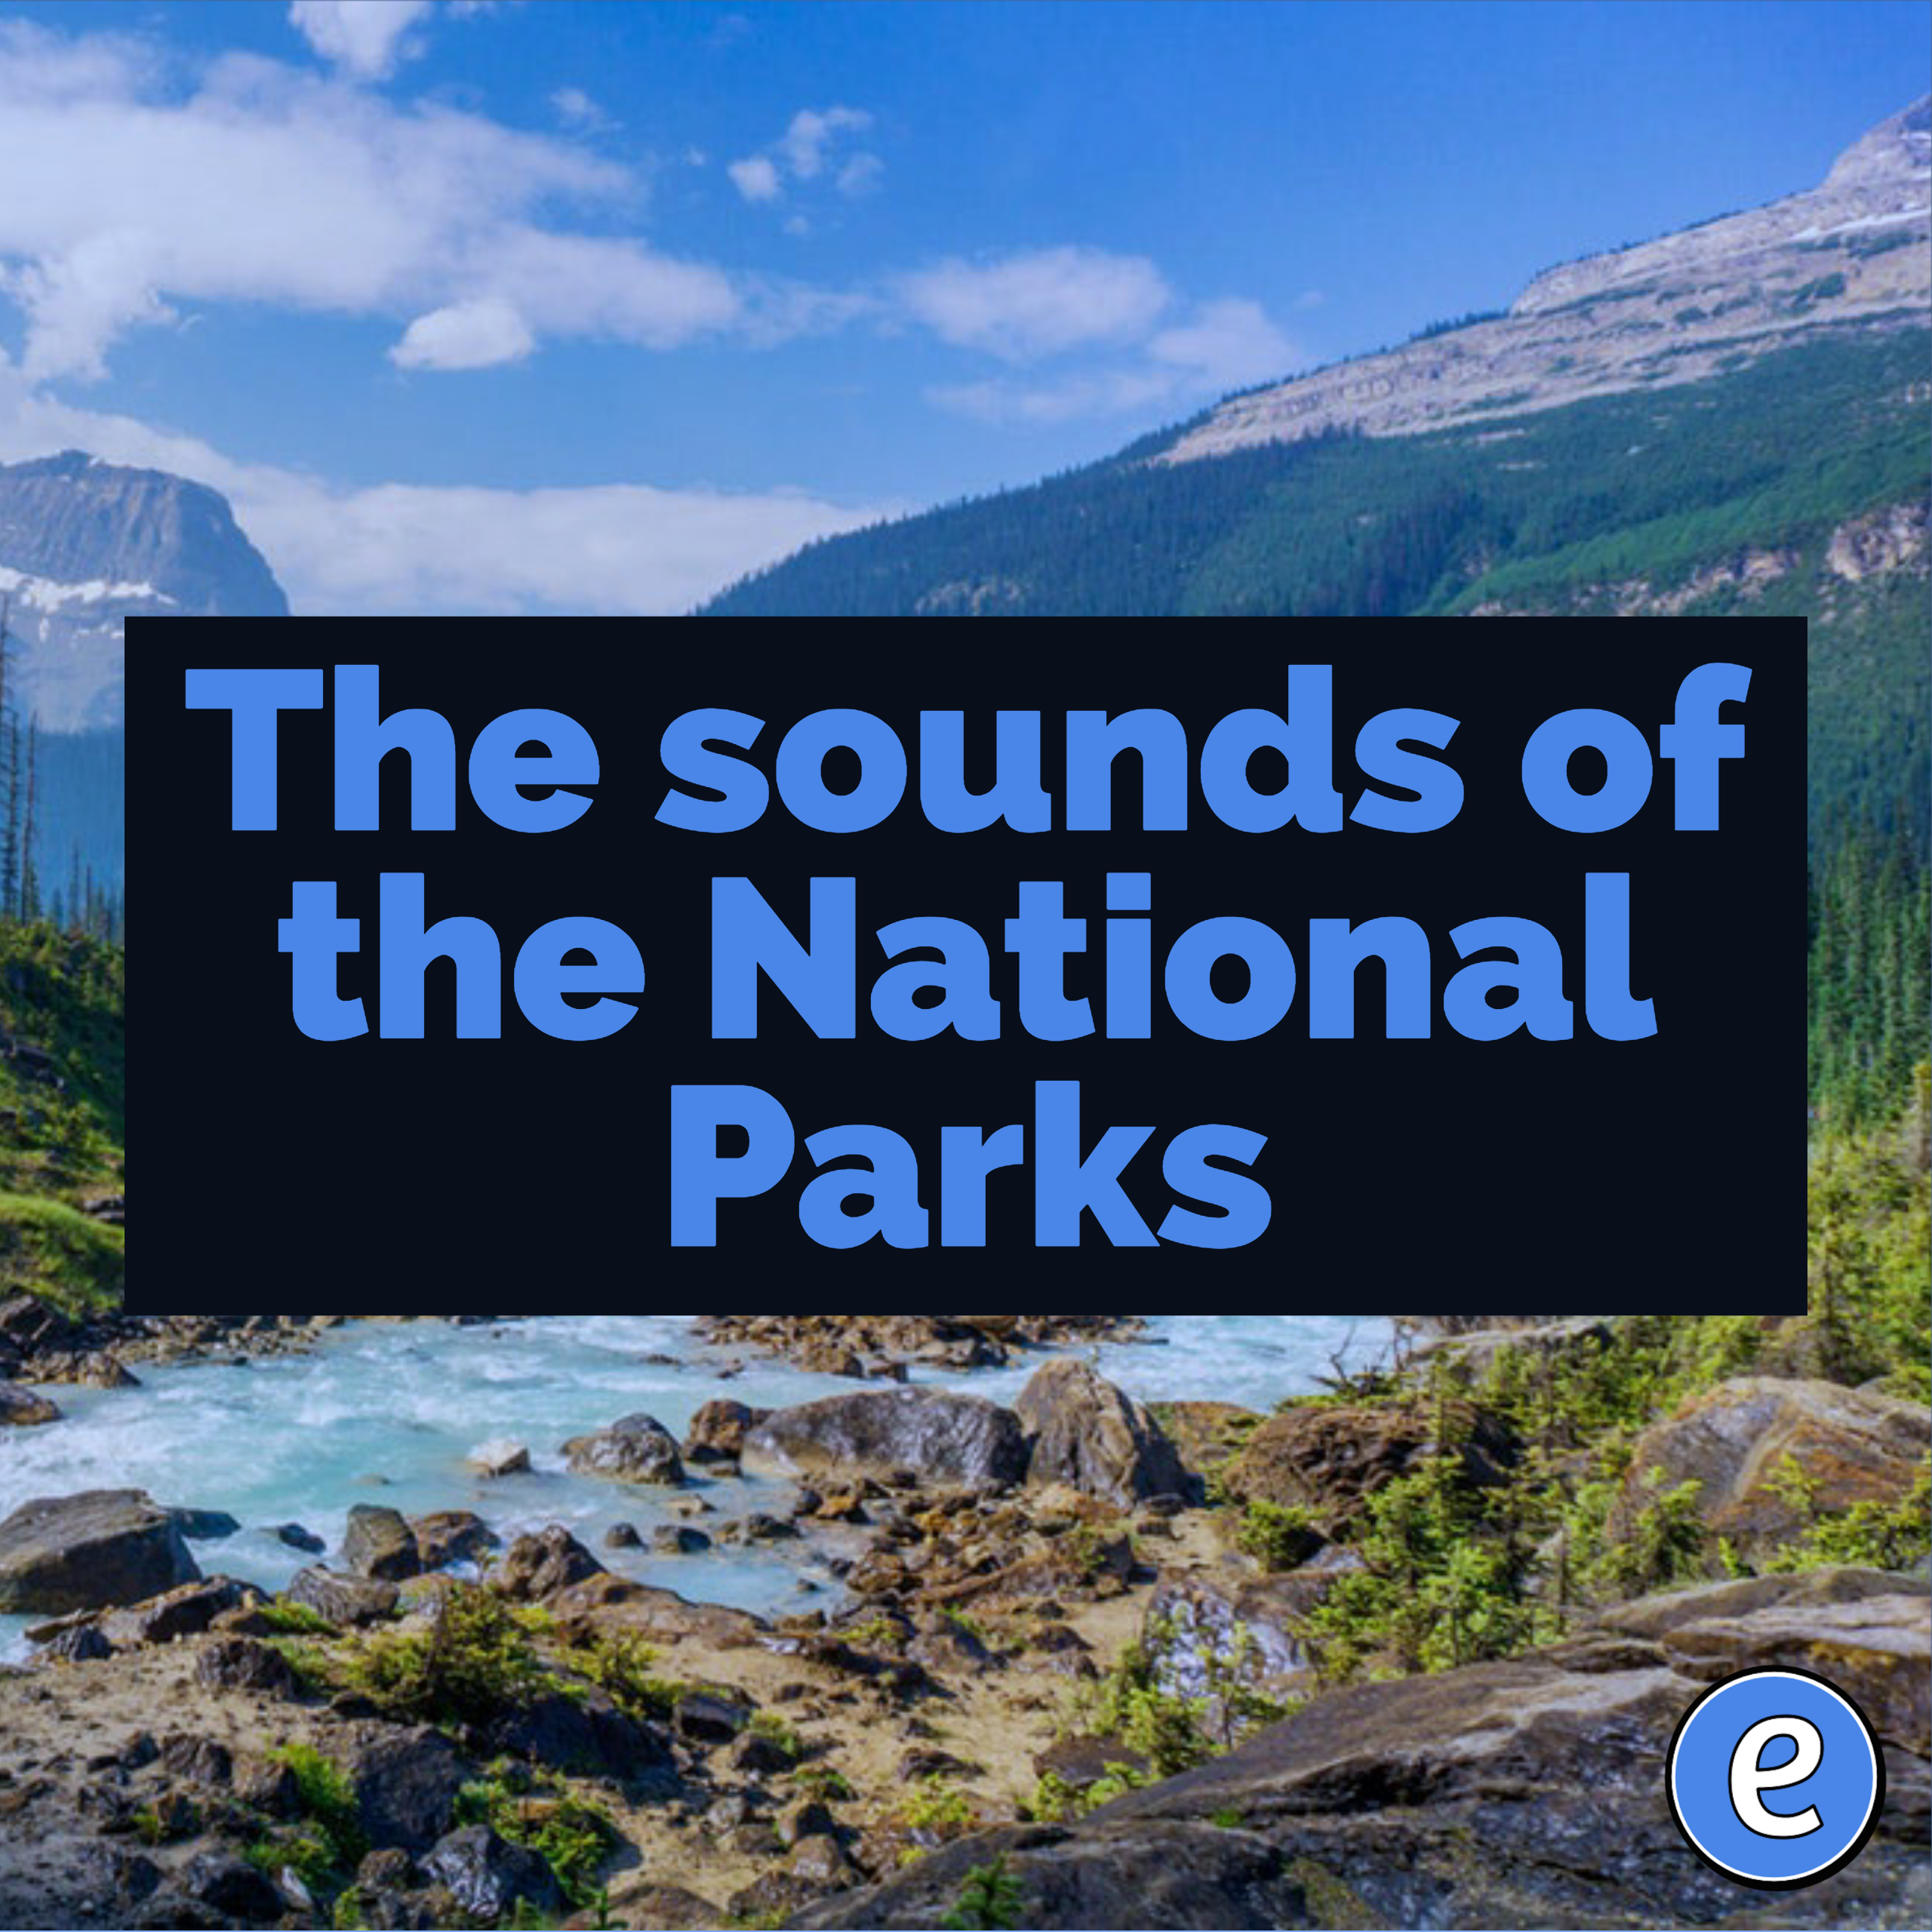 The sounds of the National Parks